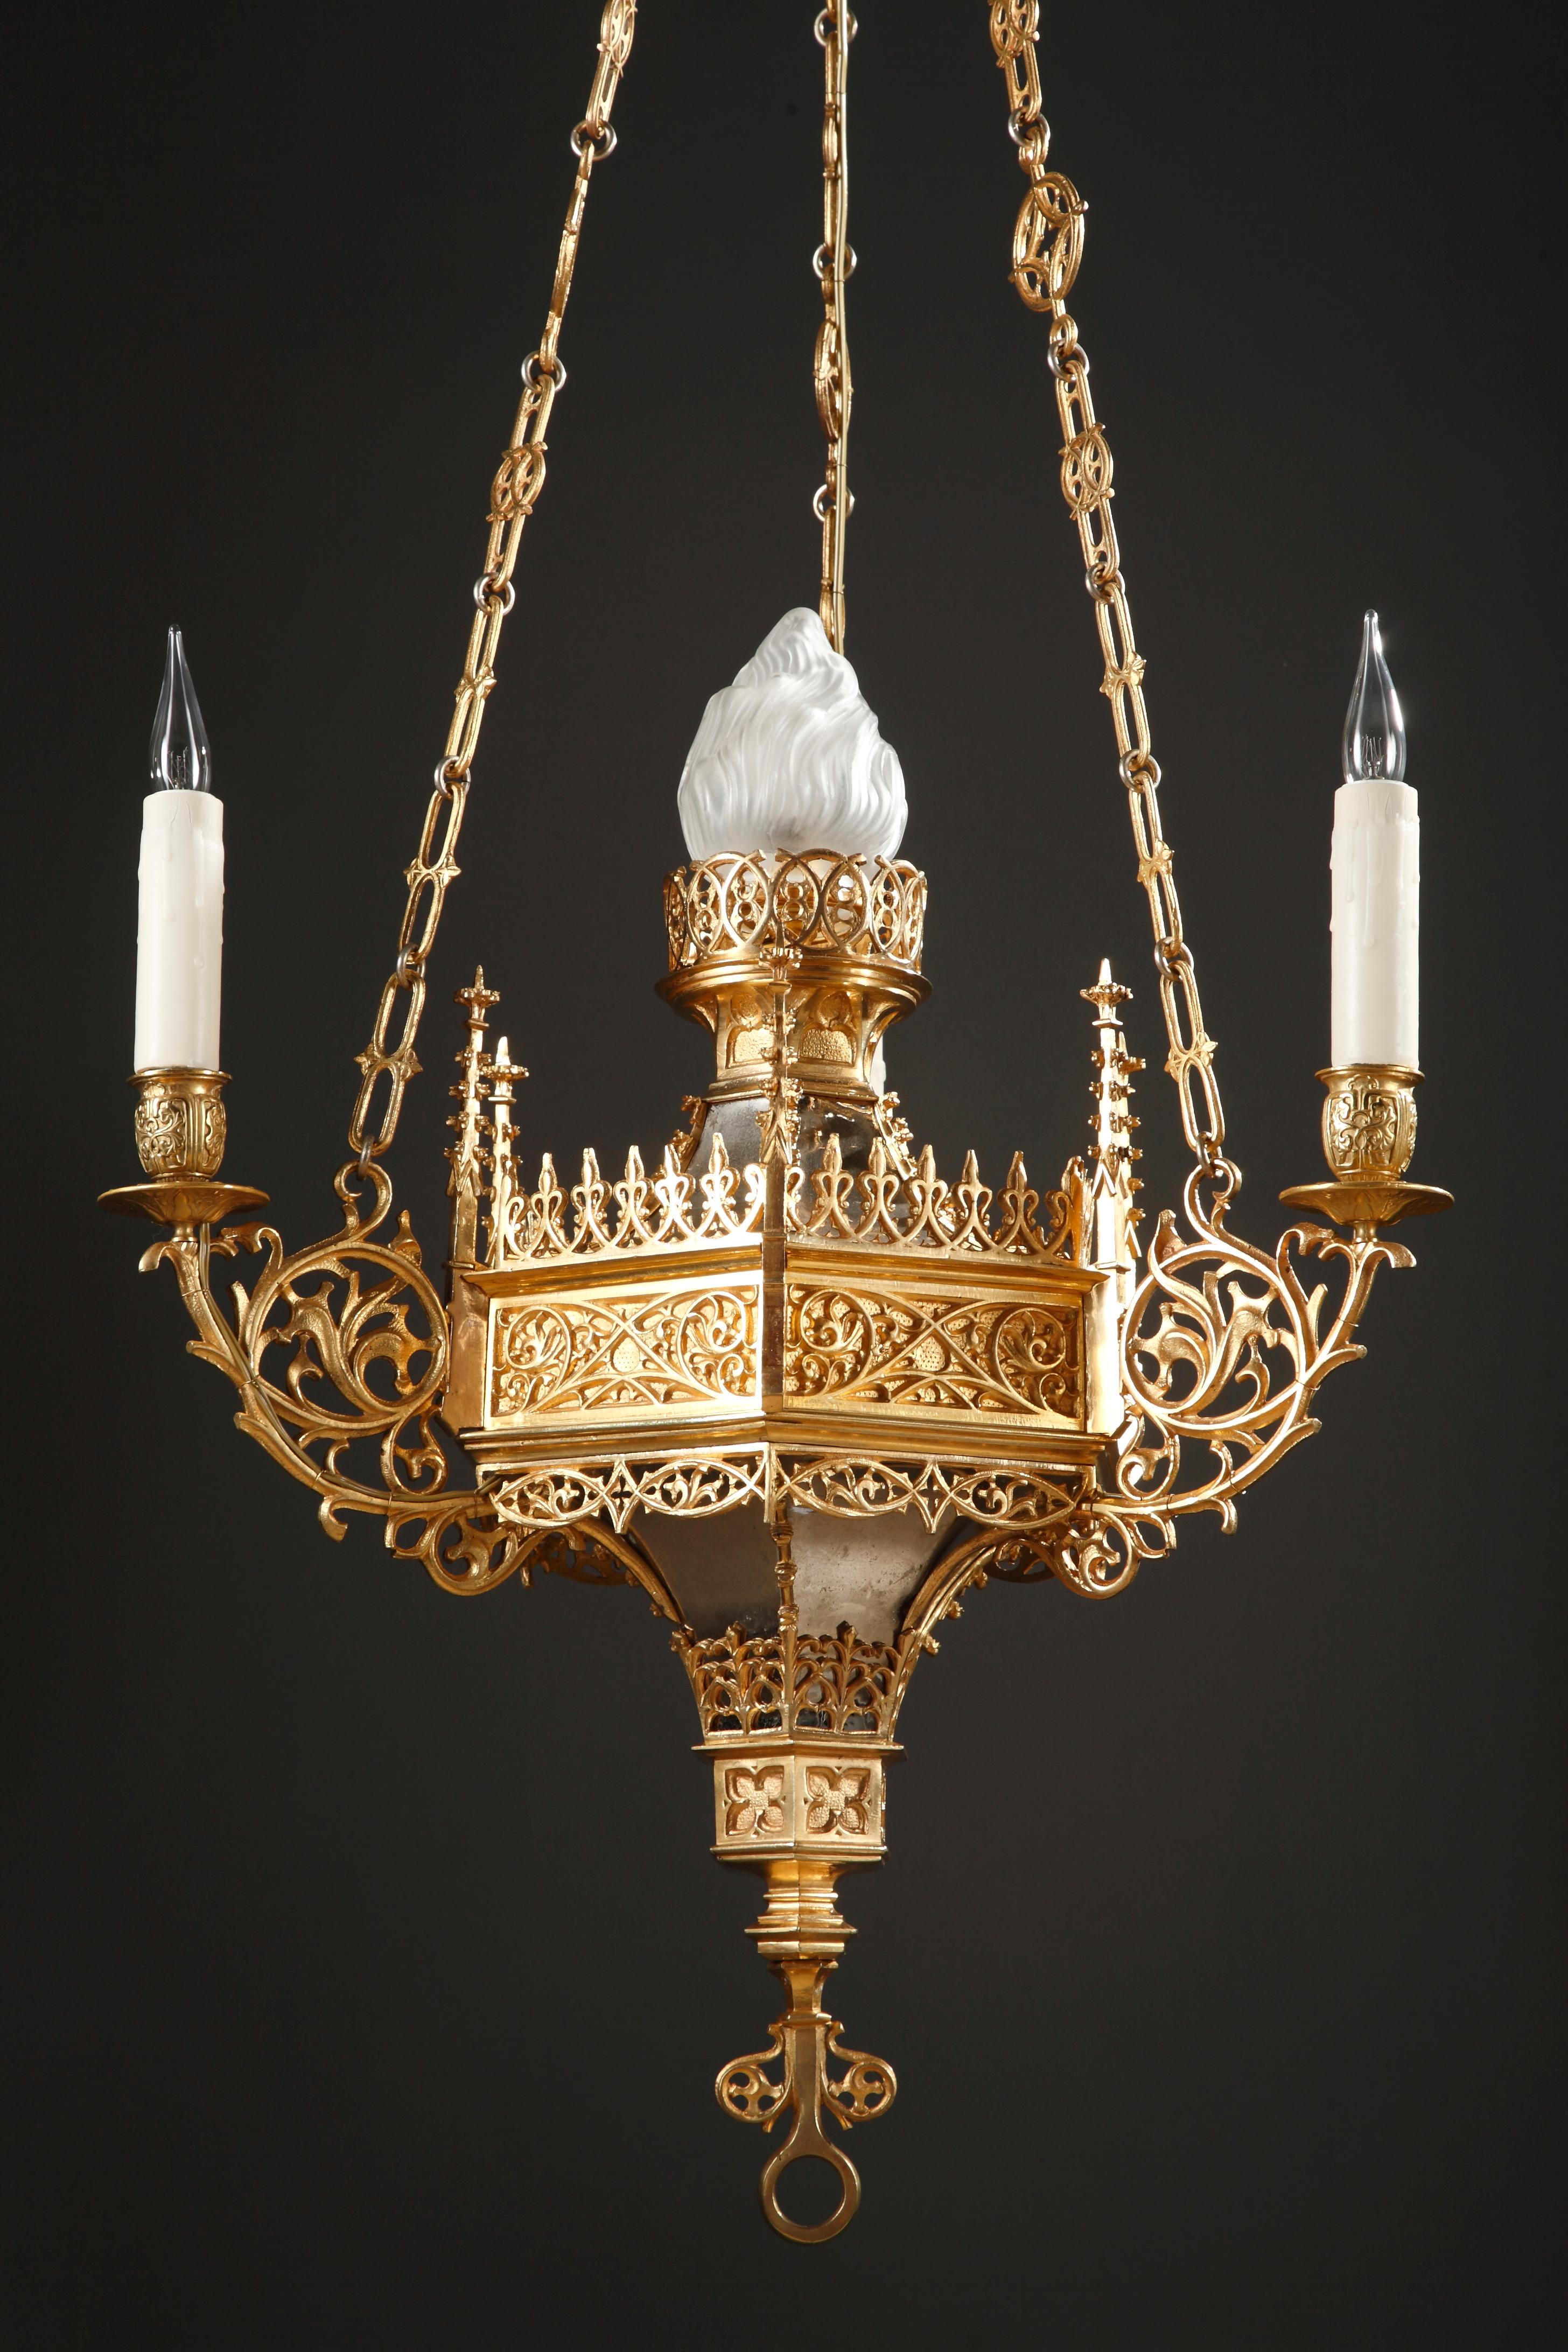 French Neo-Gothic Chandelier Attributed to F. Barbedienne, France, Late 19th Century